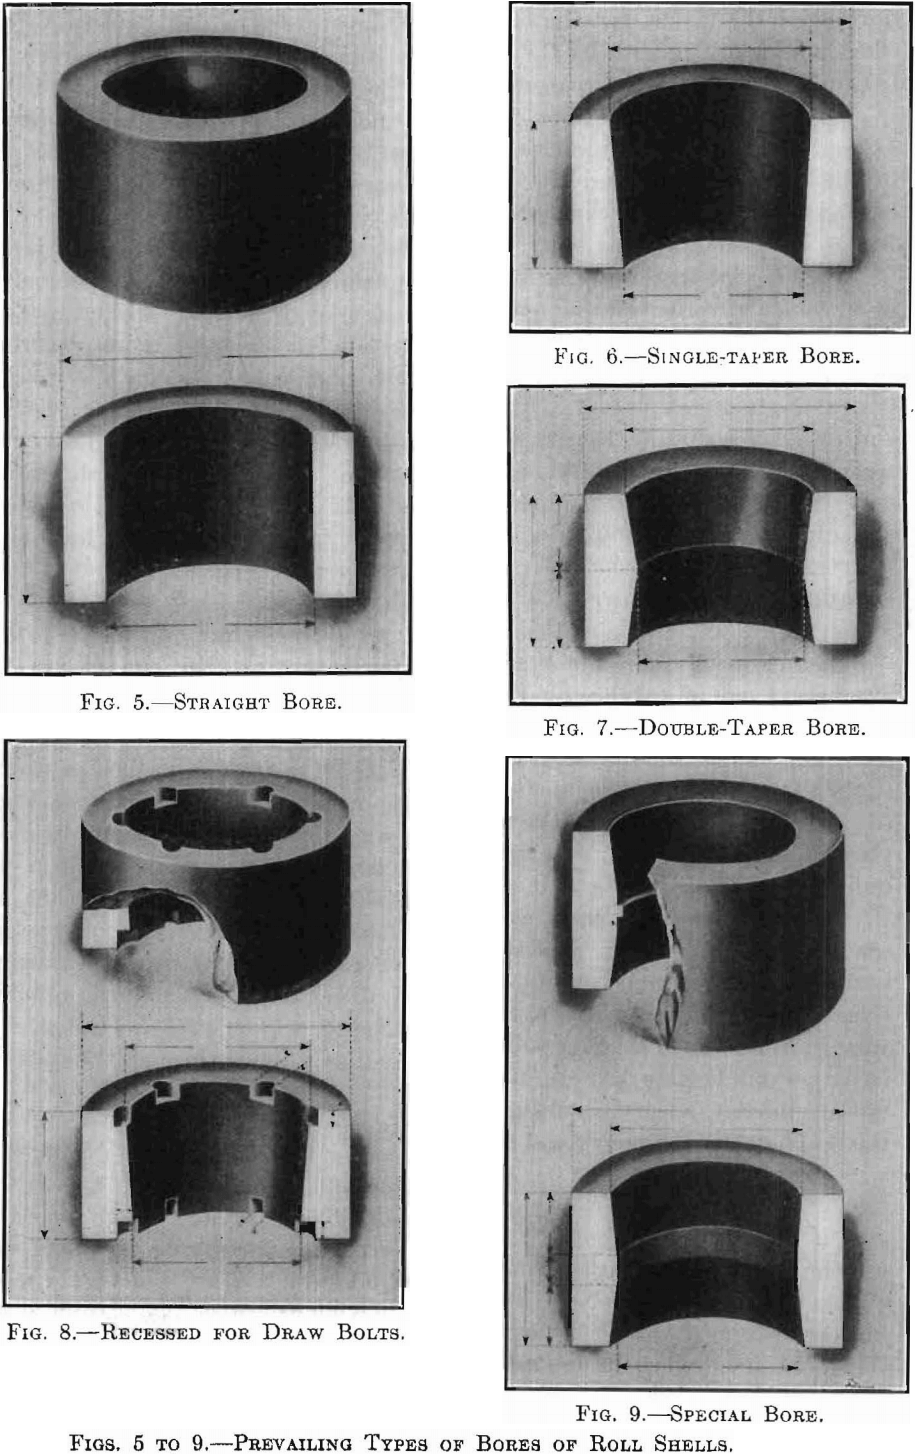 prevailing-types of bores of roll shells